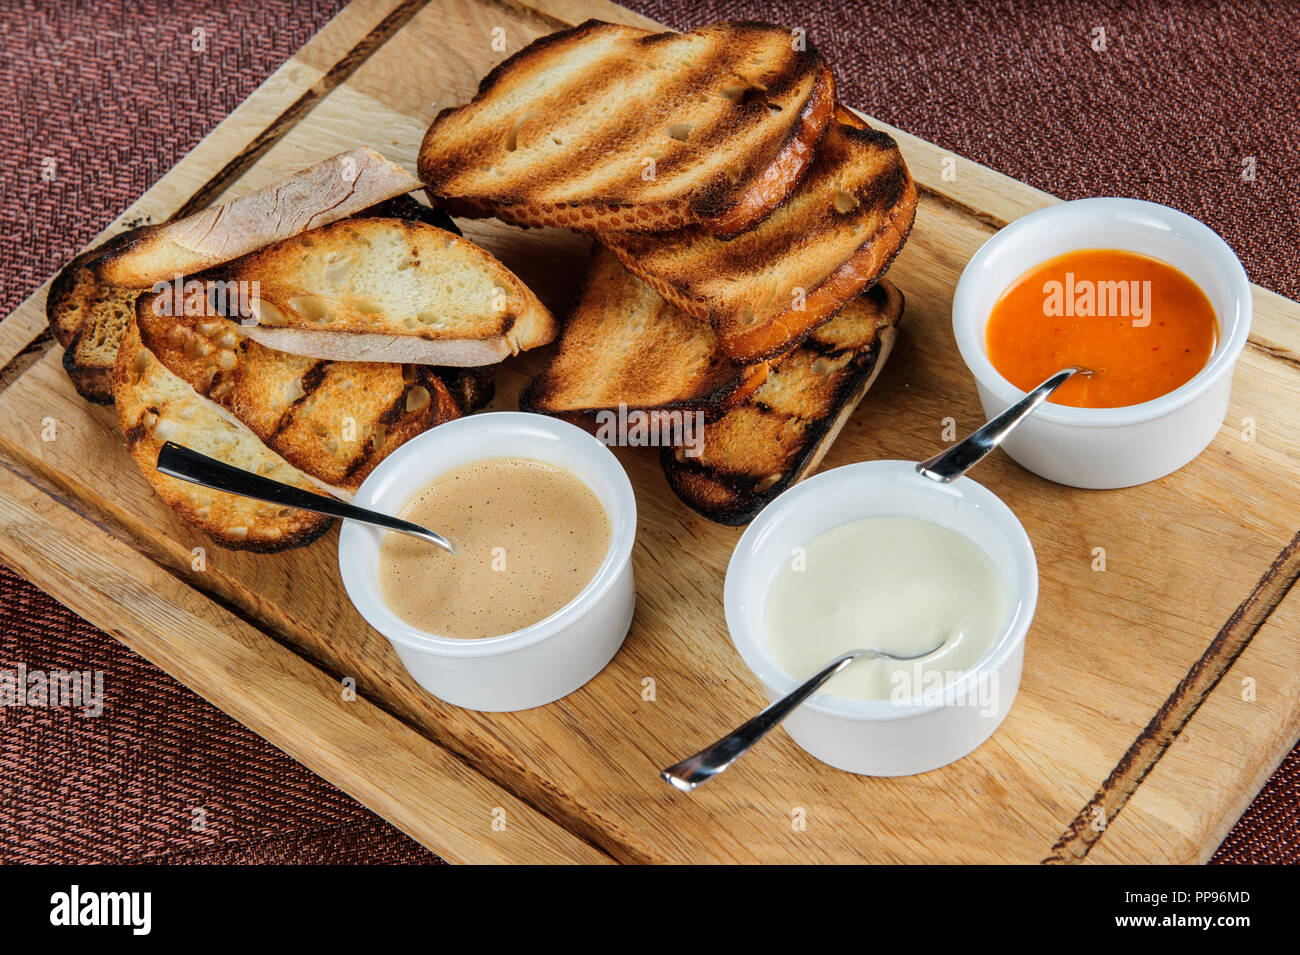 Slice of toast roasted in breaded with cheese and sesame slipped in a sauce on a wooden board Stock Photo